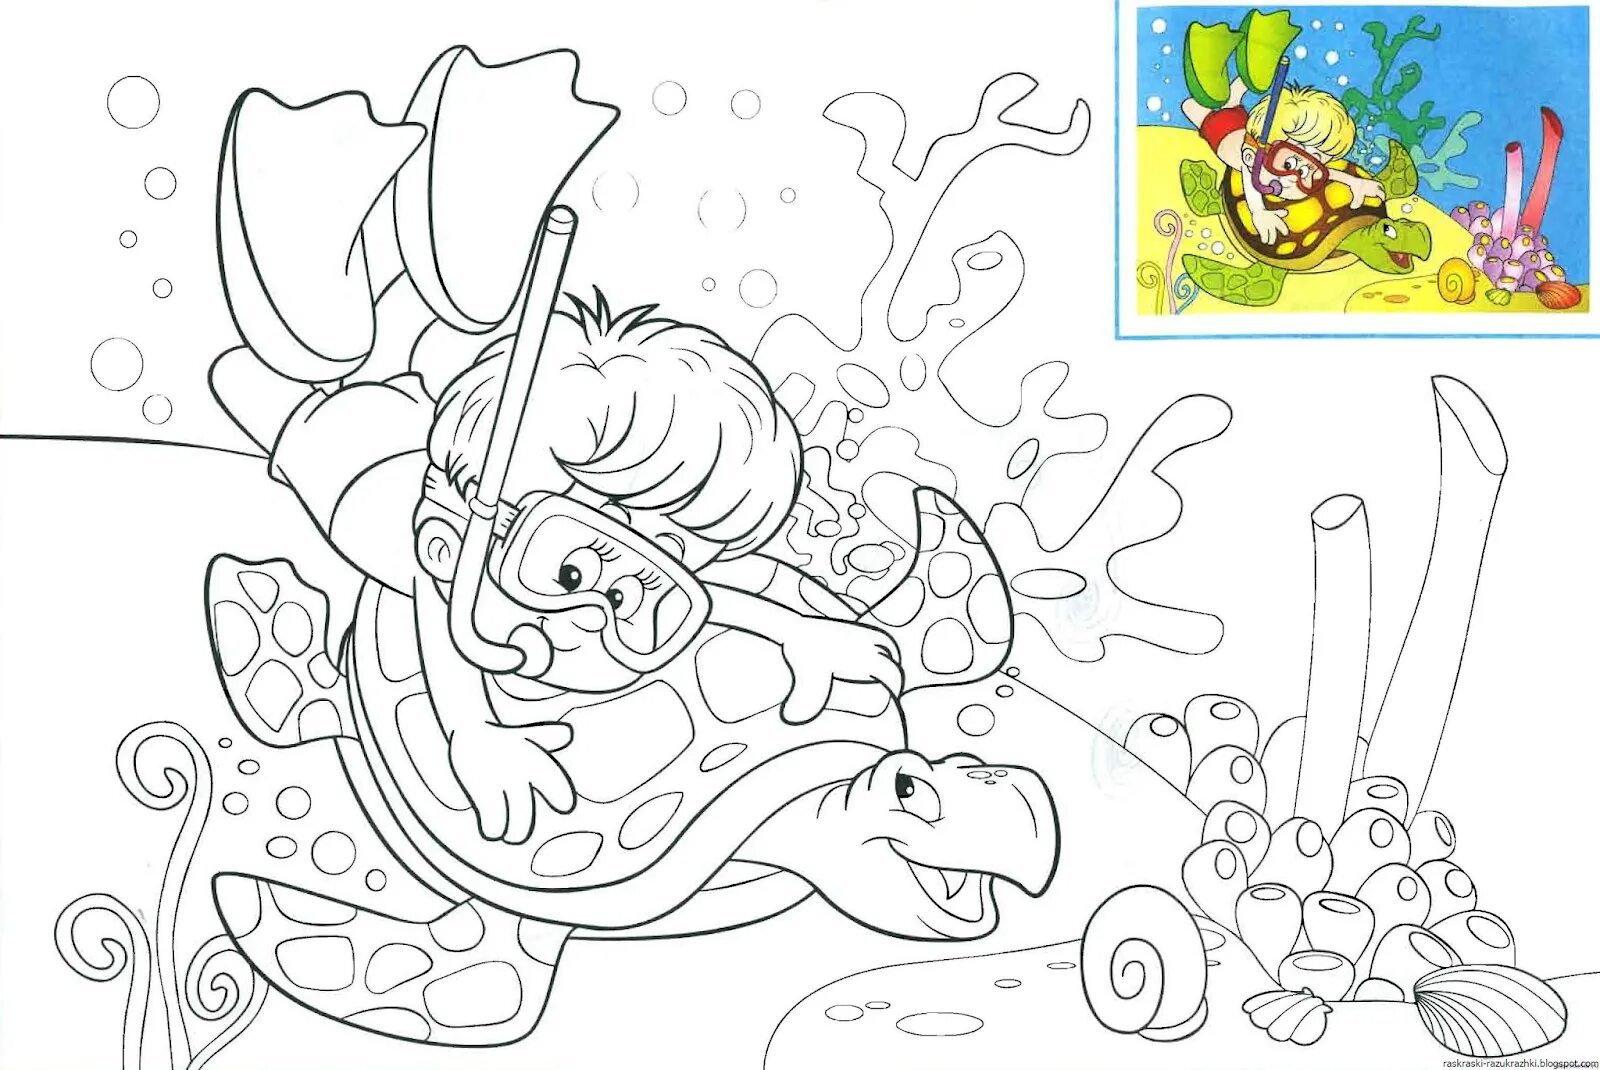 Coloring dreamy water children's world